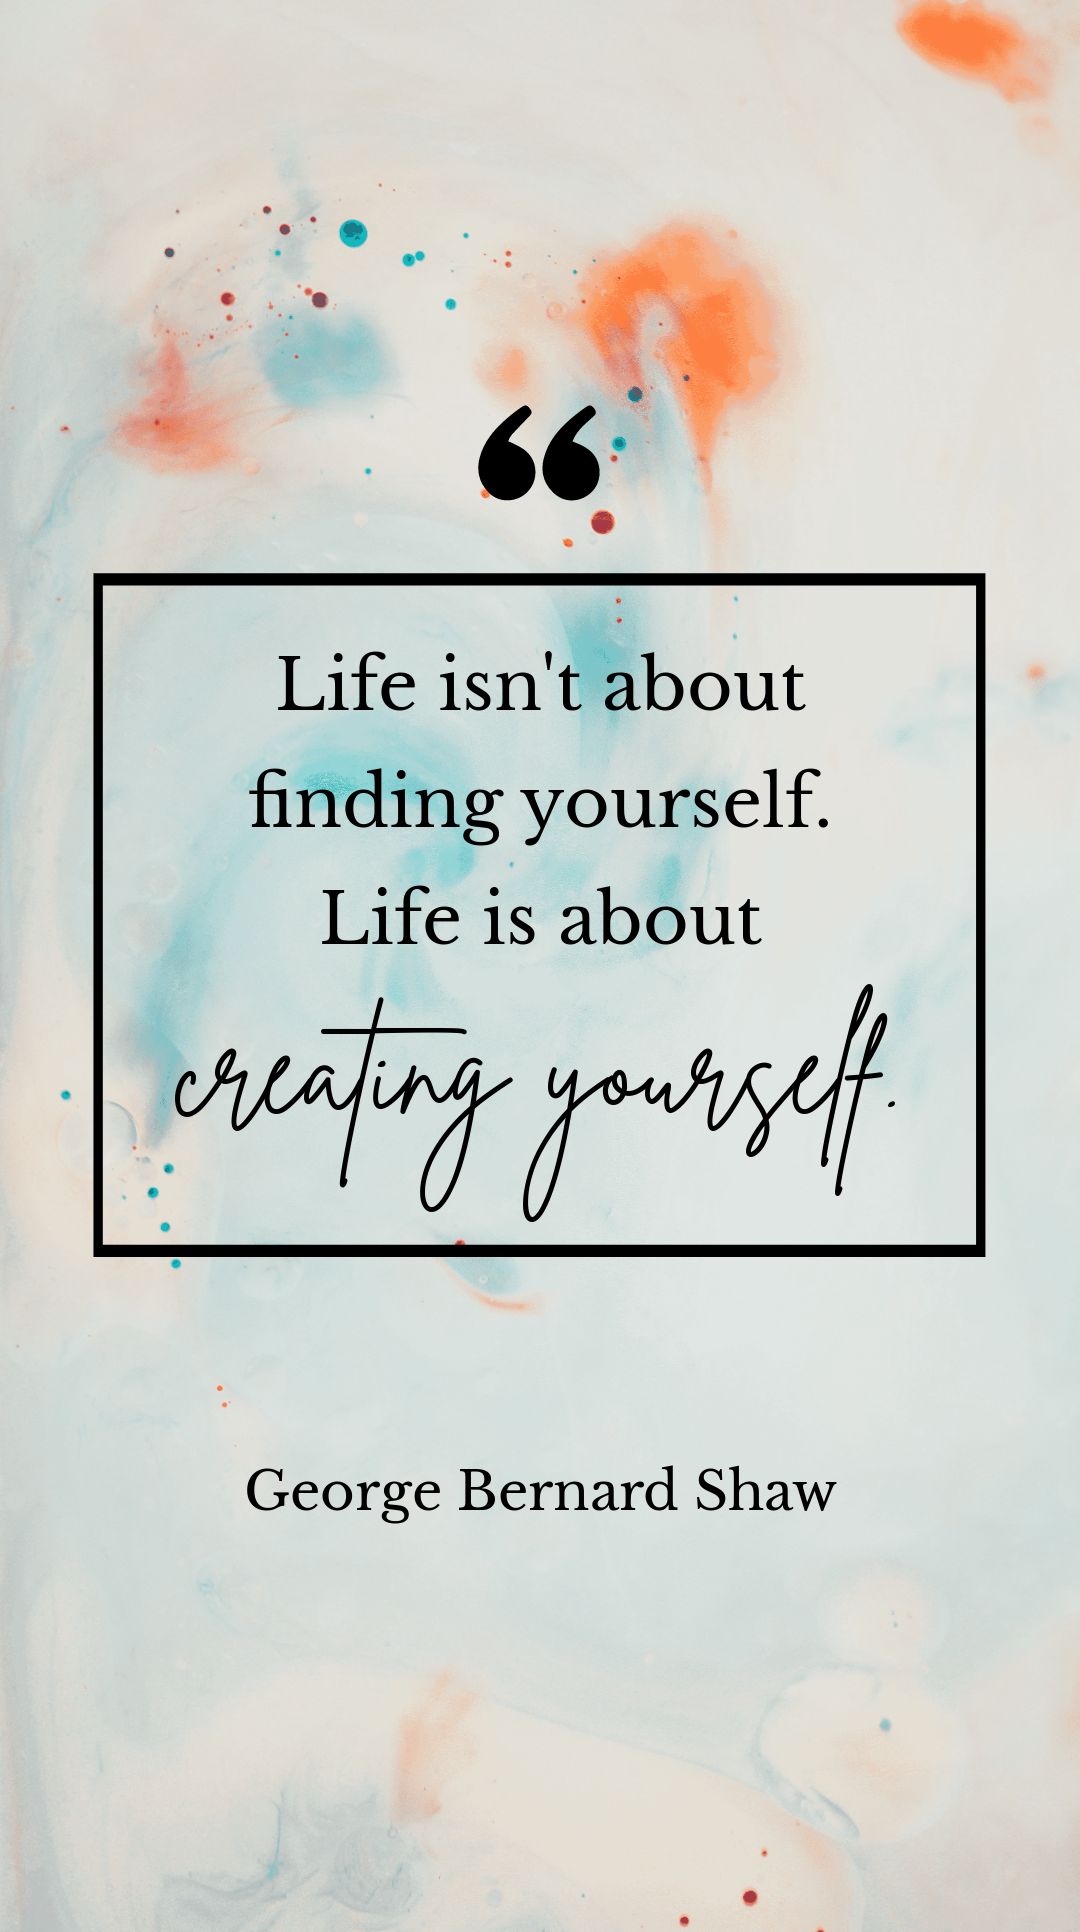 George Bernard Shaw - Life isn't about finding yourself. Life is about creating yourself.